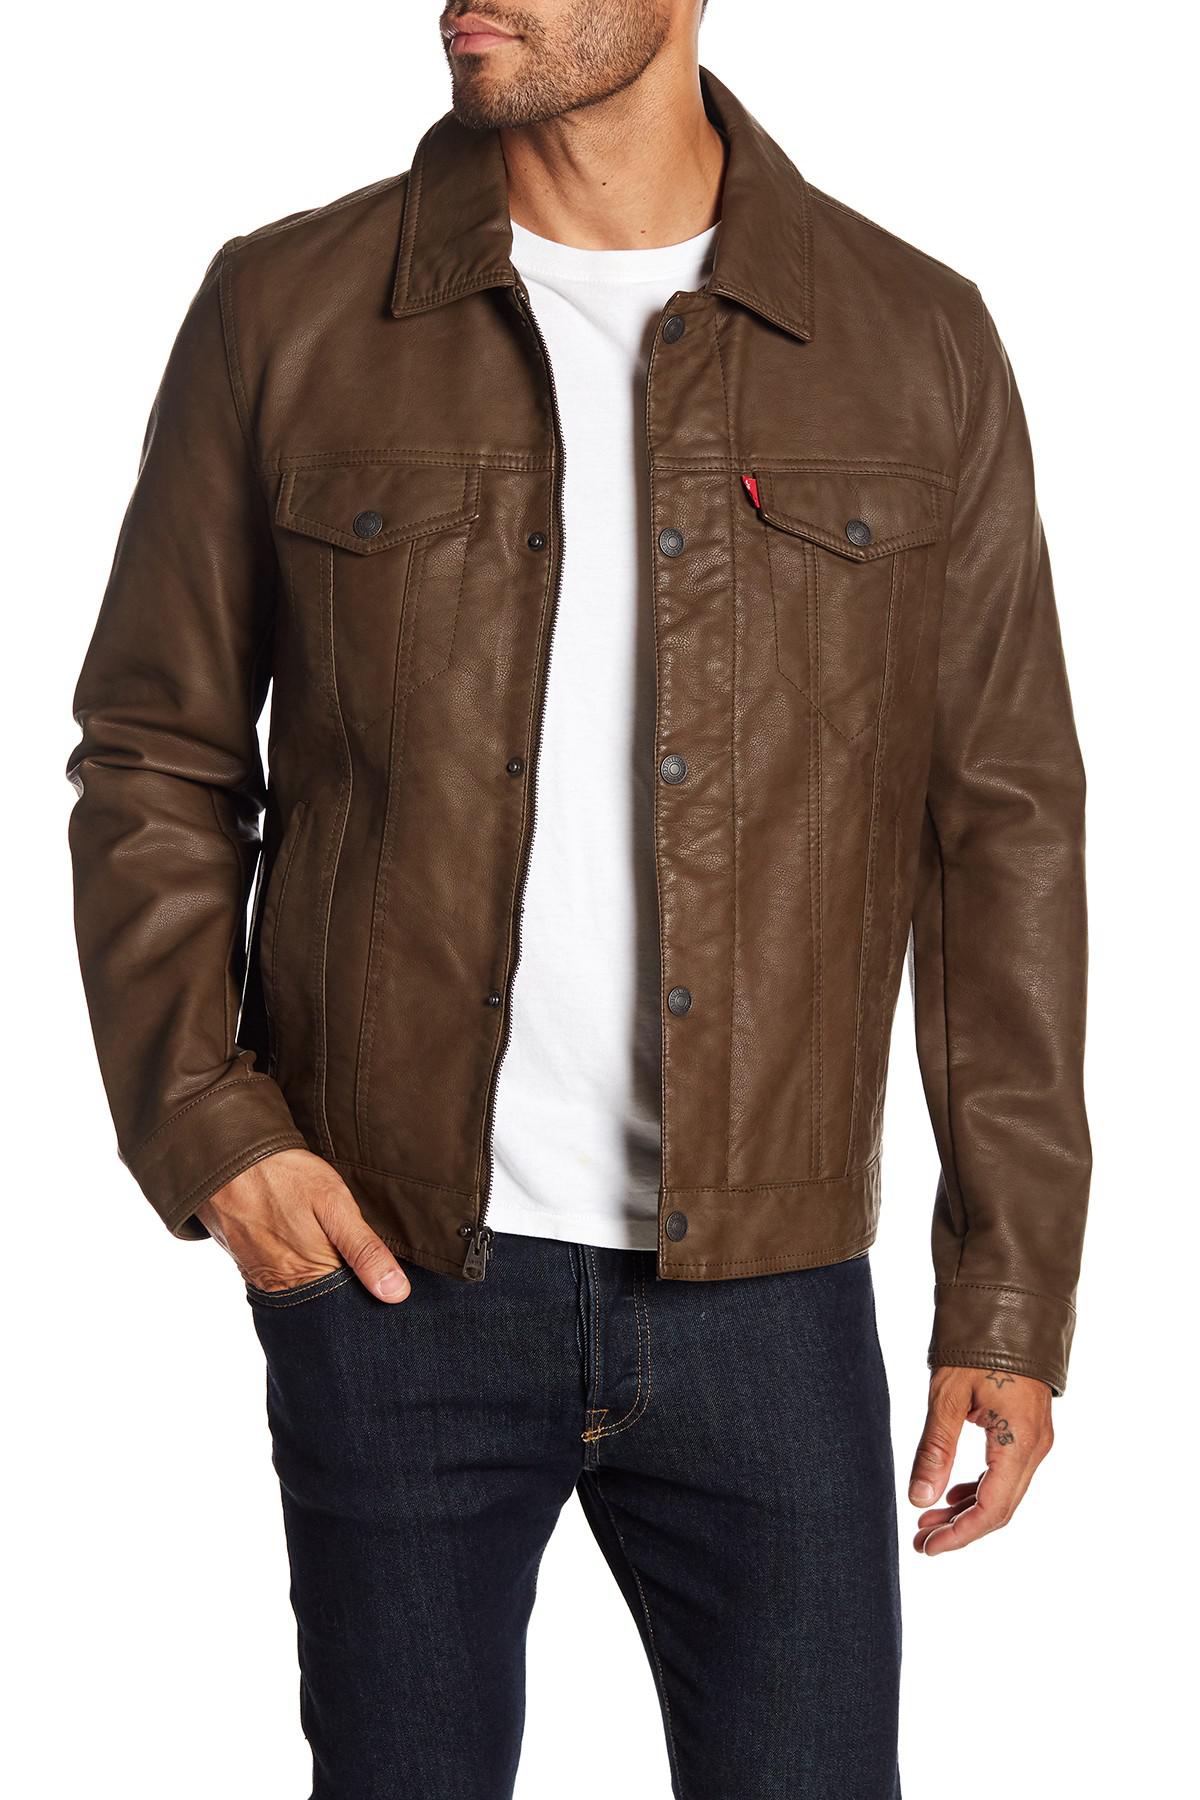 Brown Leather Trucker Jacket on Sale, SAVE 34% 